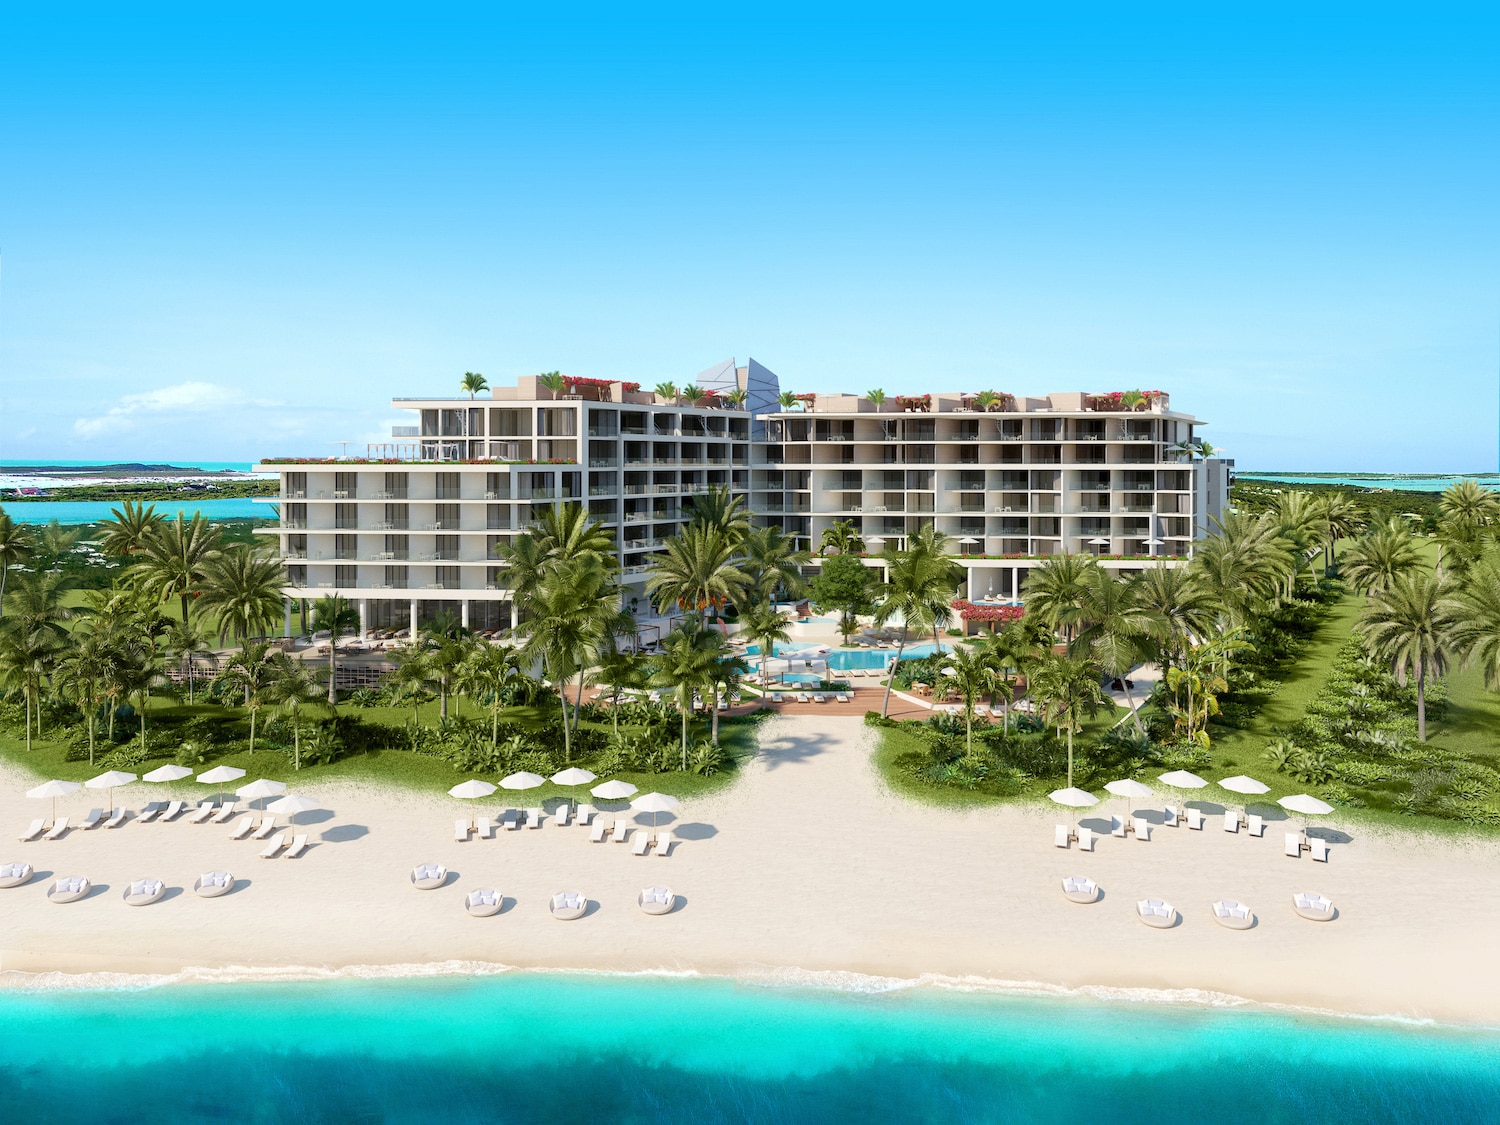 A rendering of the Andaz Turks and Caicos resort.